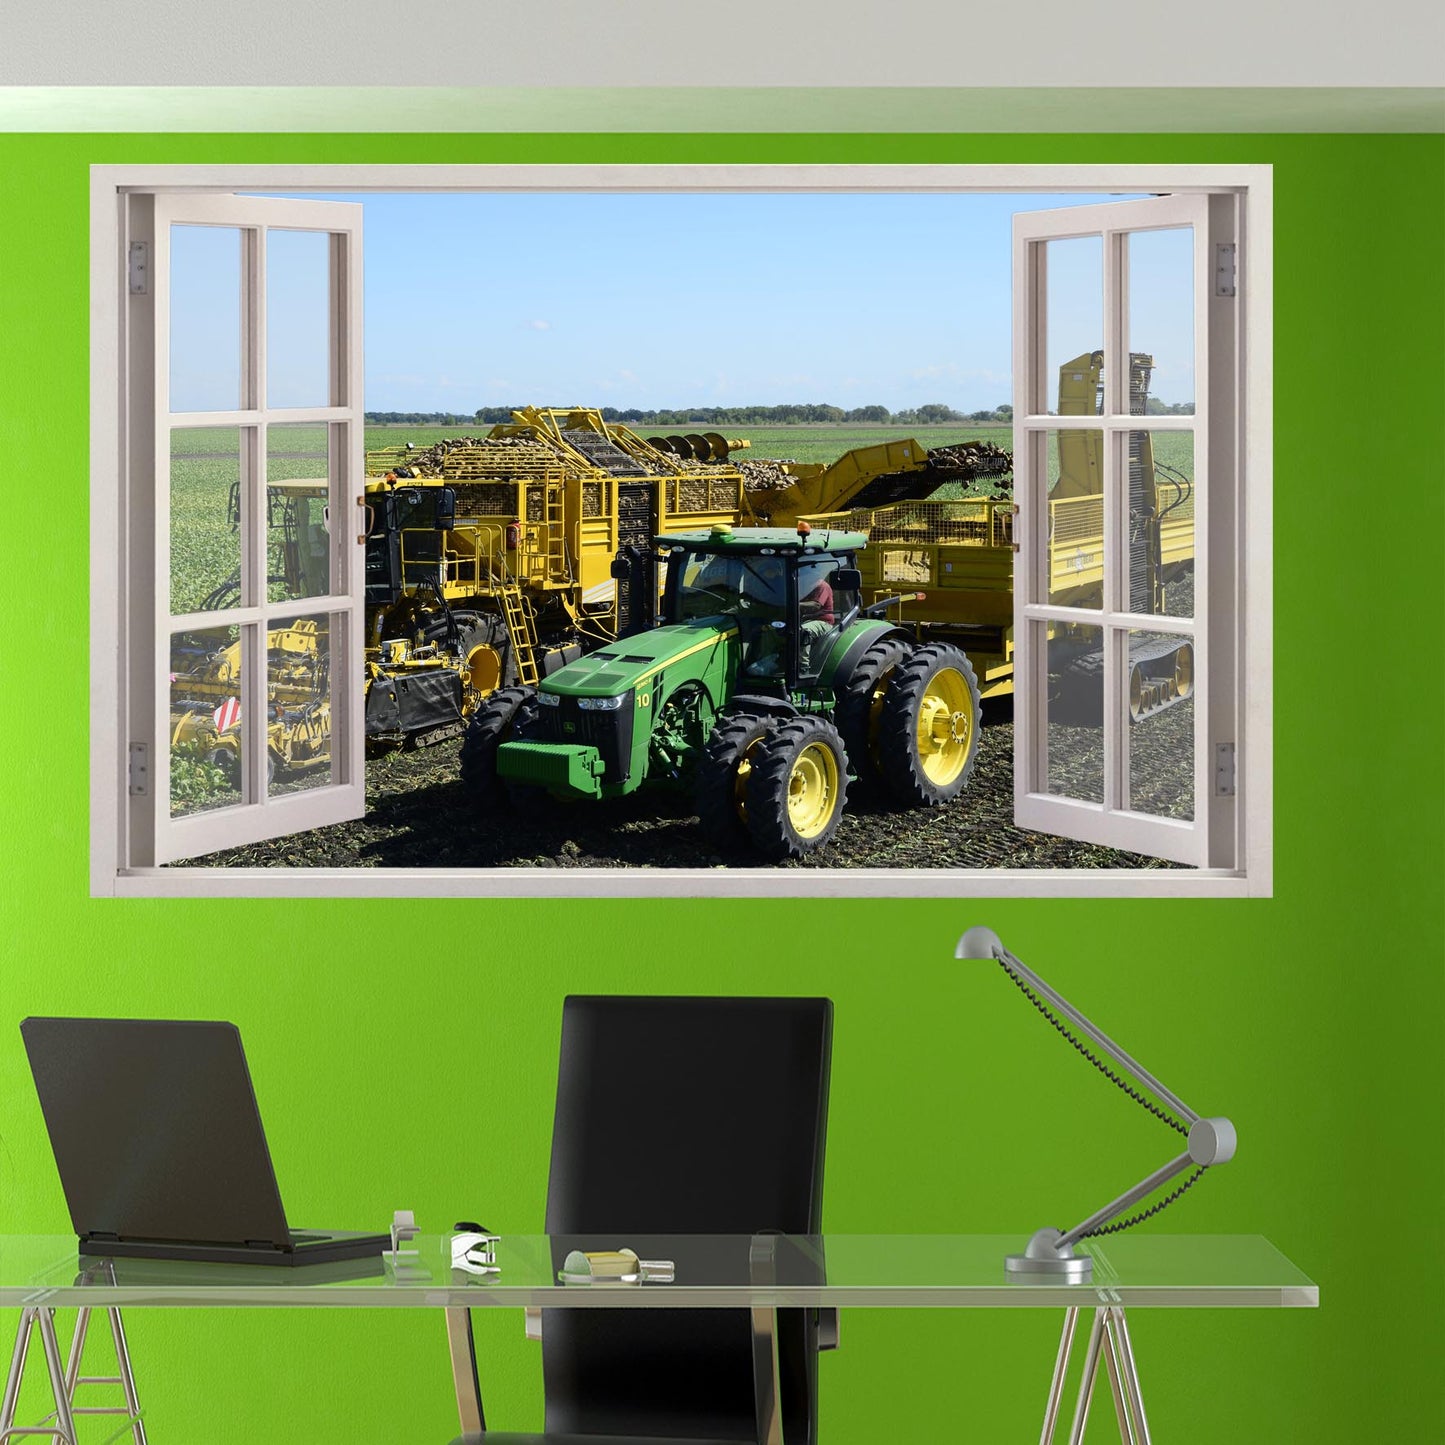 POTATO HARVESTER AND TRACTOR WALL STICKERS POSTER